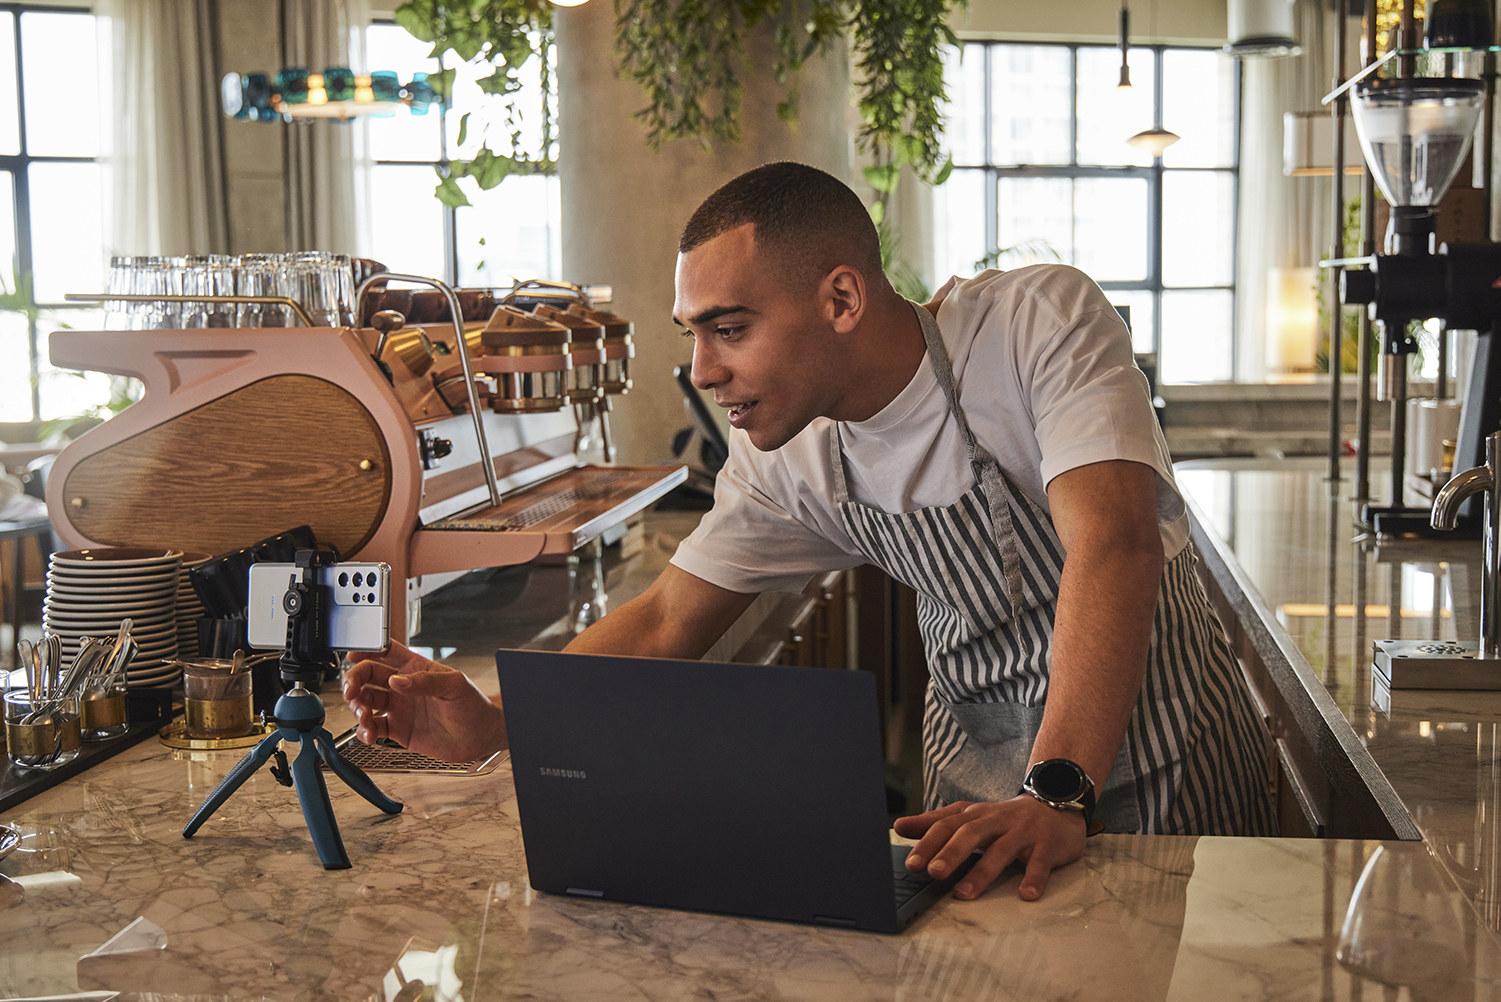 A man at a bar in a restaurant at a laptop touching his phone which is on a tripod.